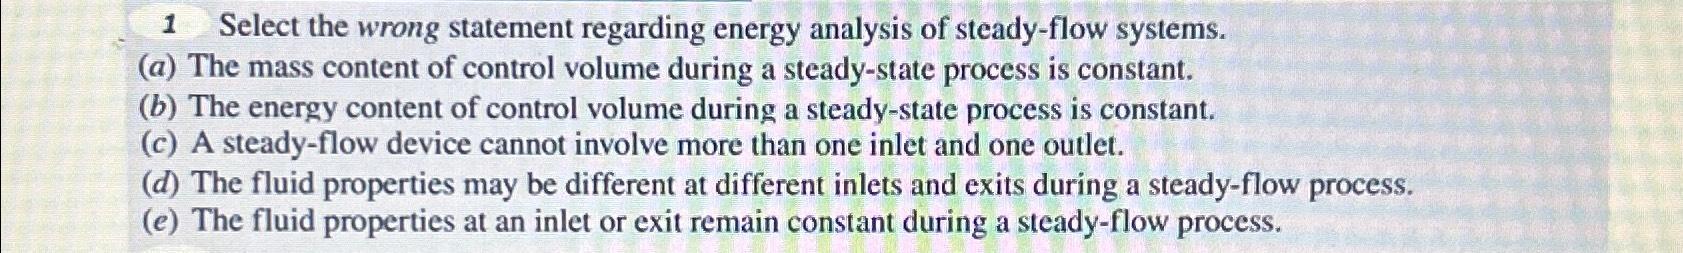 1 Select the wrong statement regarding energy analysis of steady-flow systems. (a) The mass content of